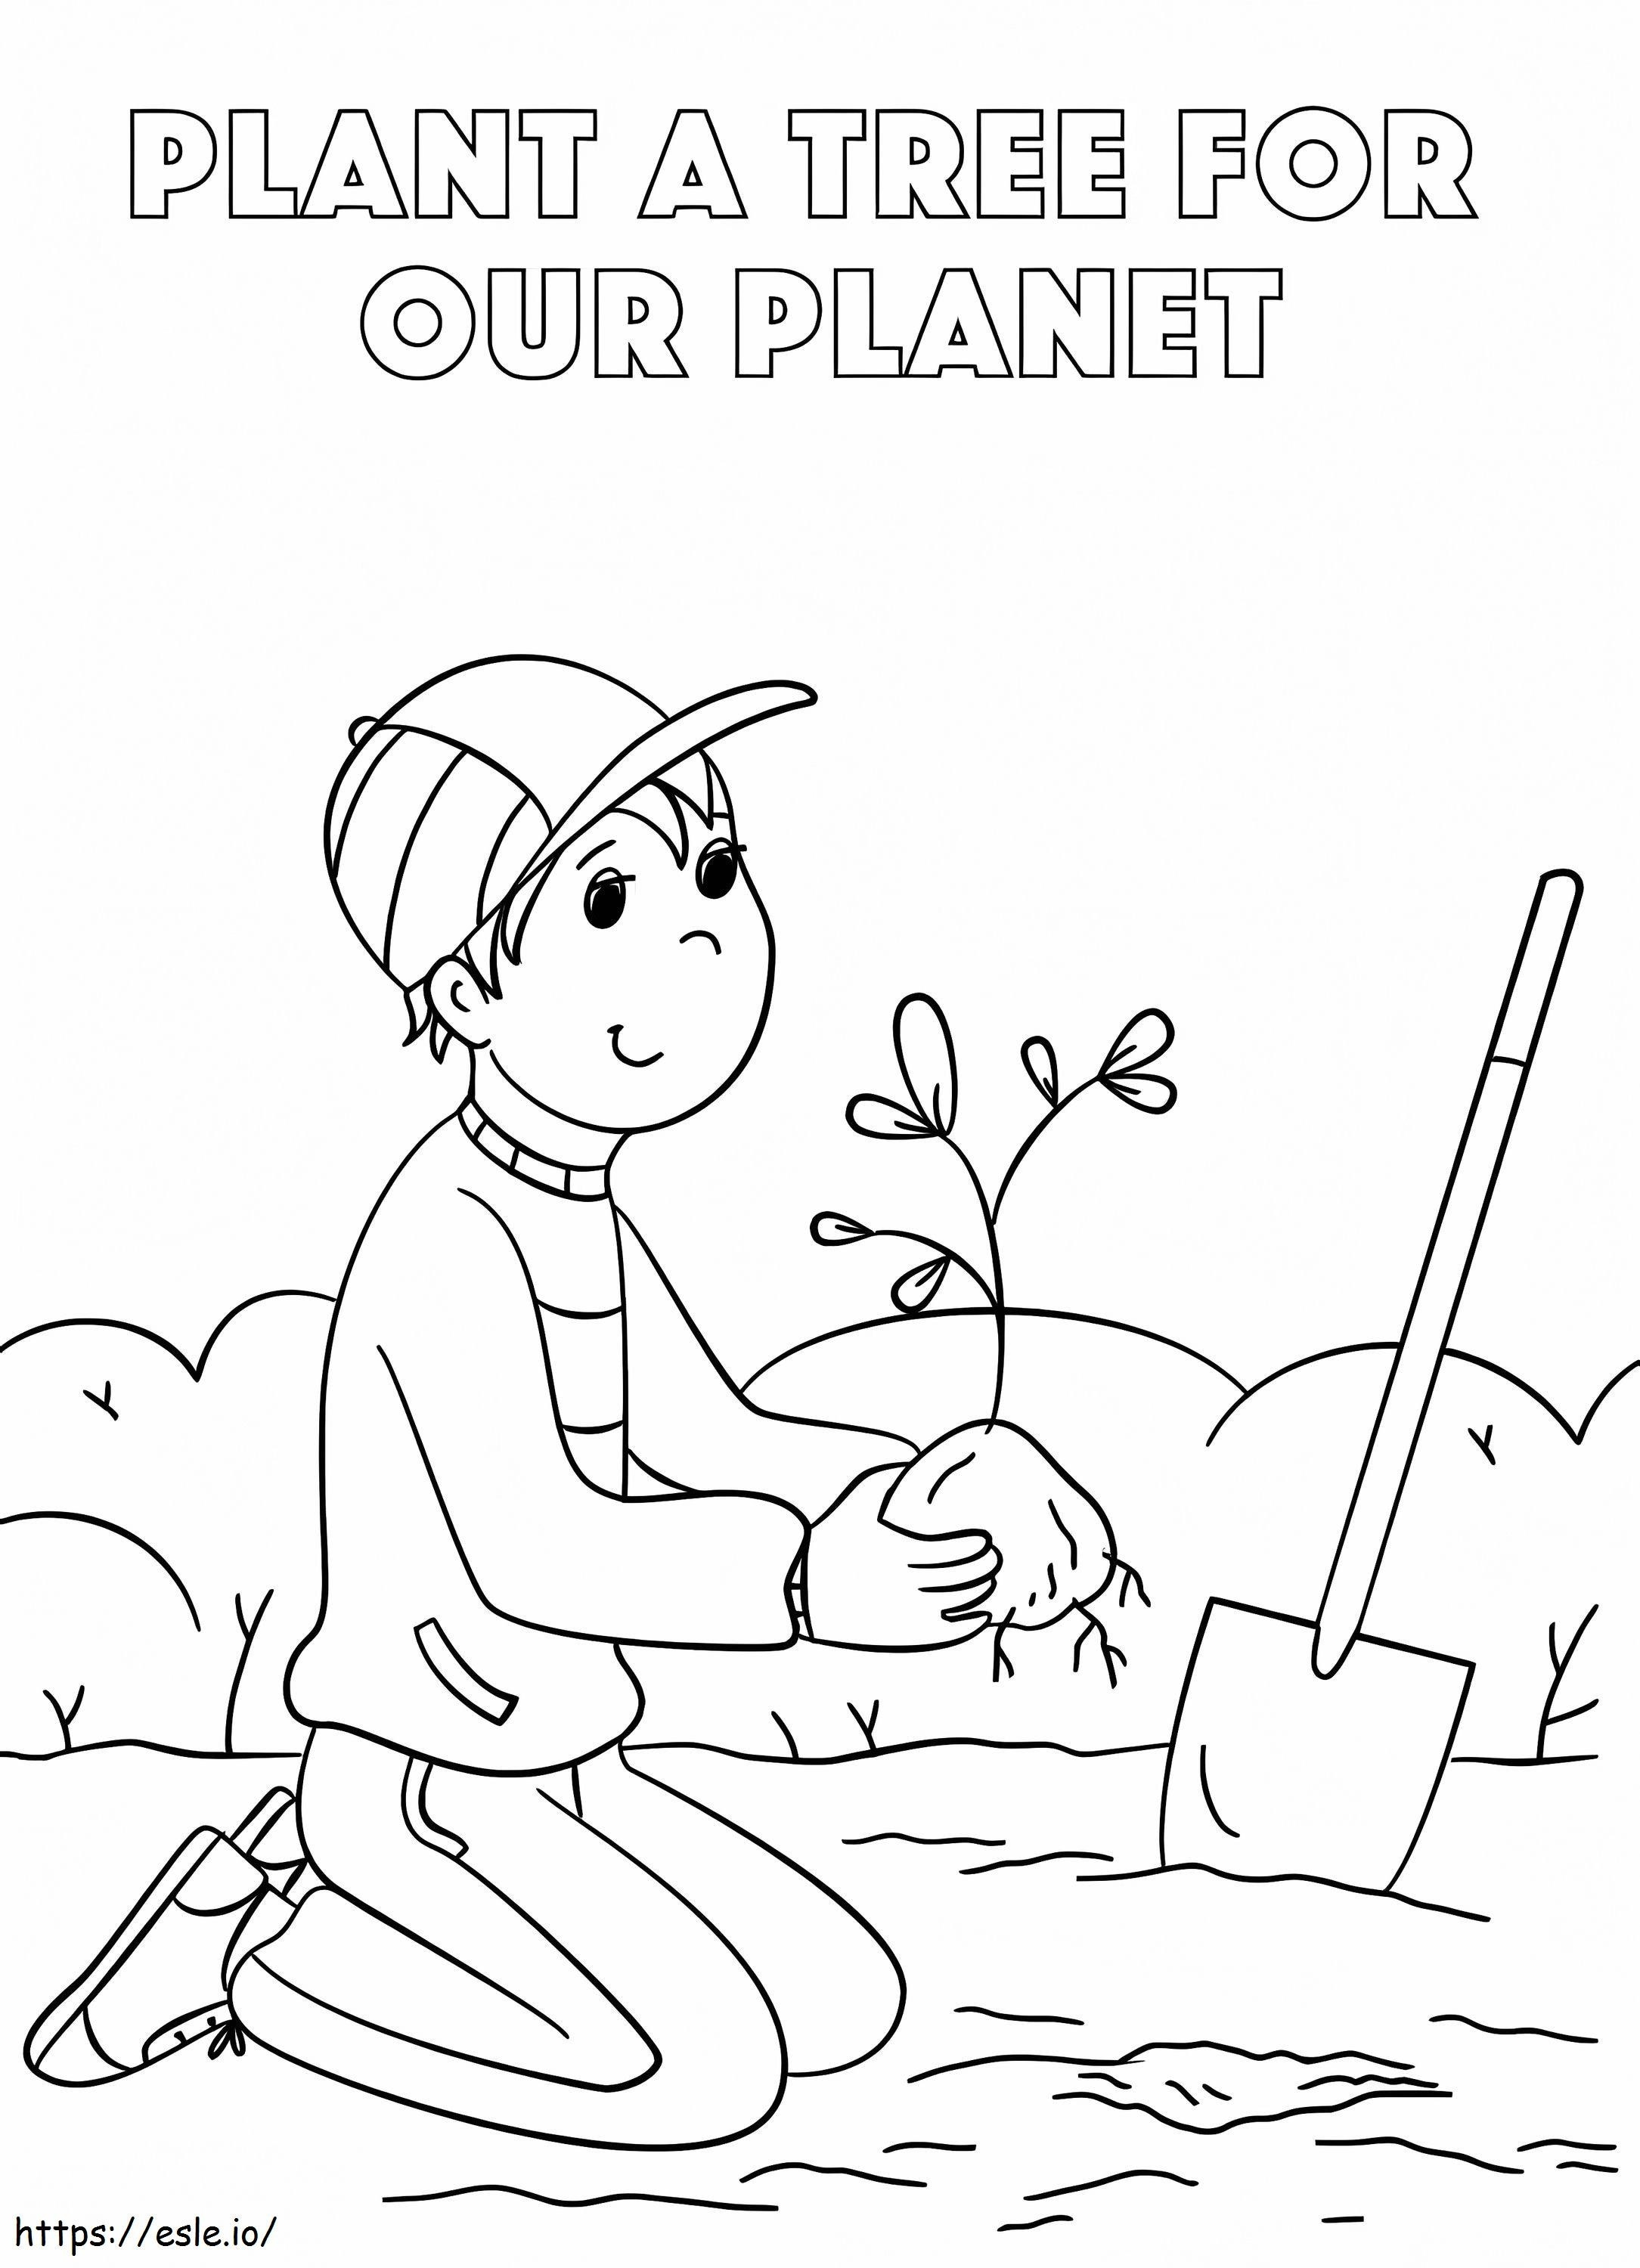 Plant A Tree 2 coloring page